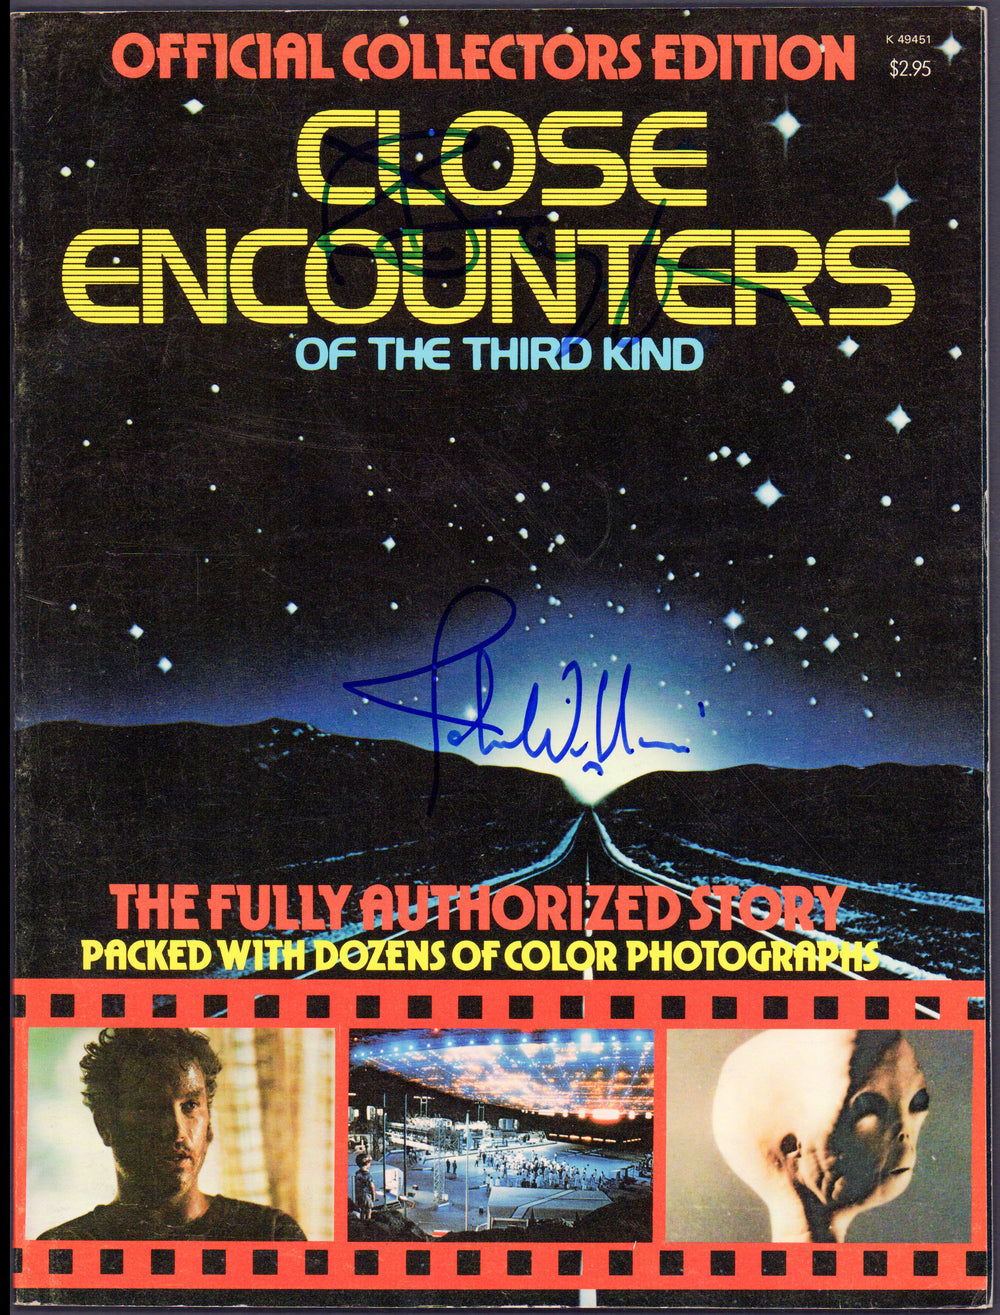 Close Encounters of the Third Kind Official Collectors Edition Signed by Richard Dreyfuss & Composer John Williams